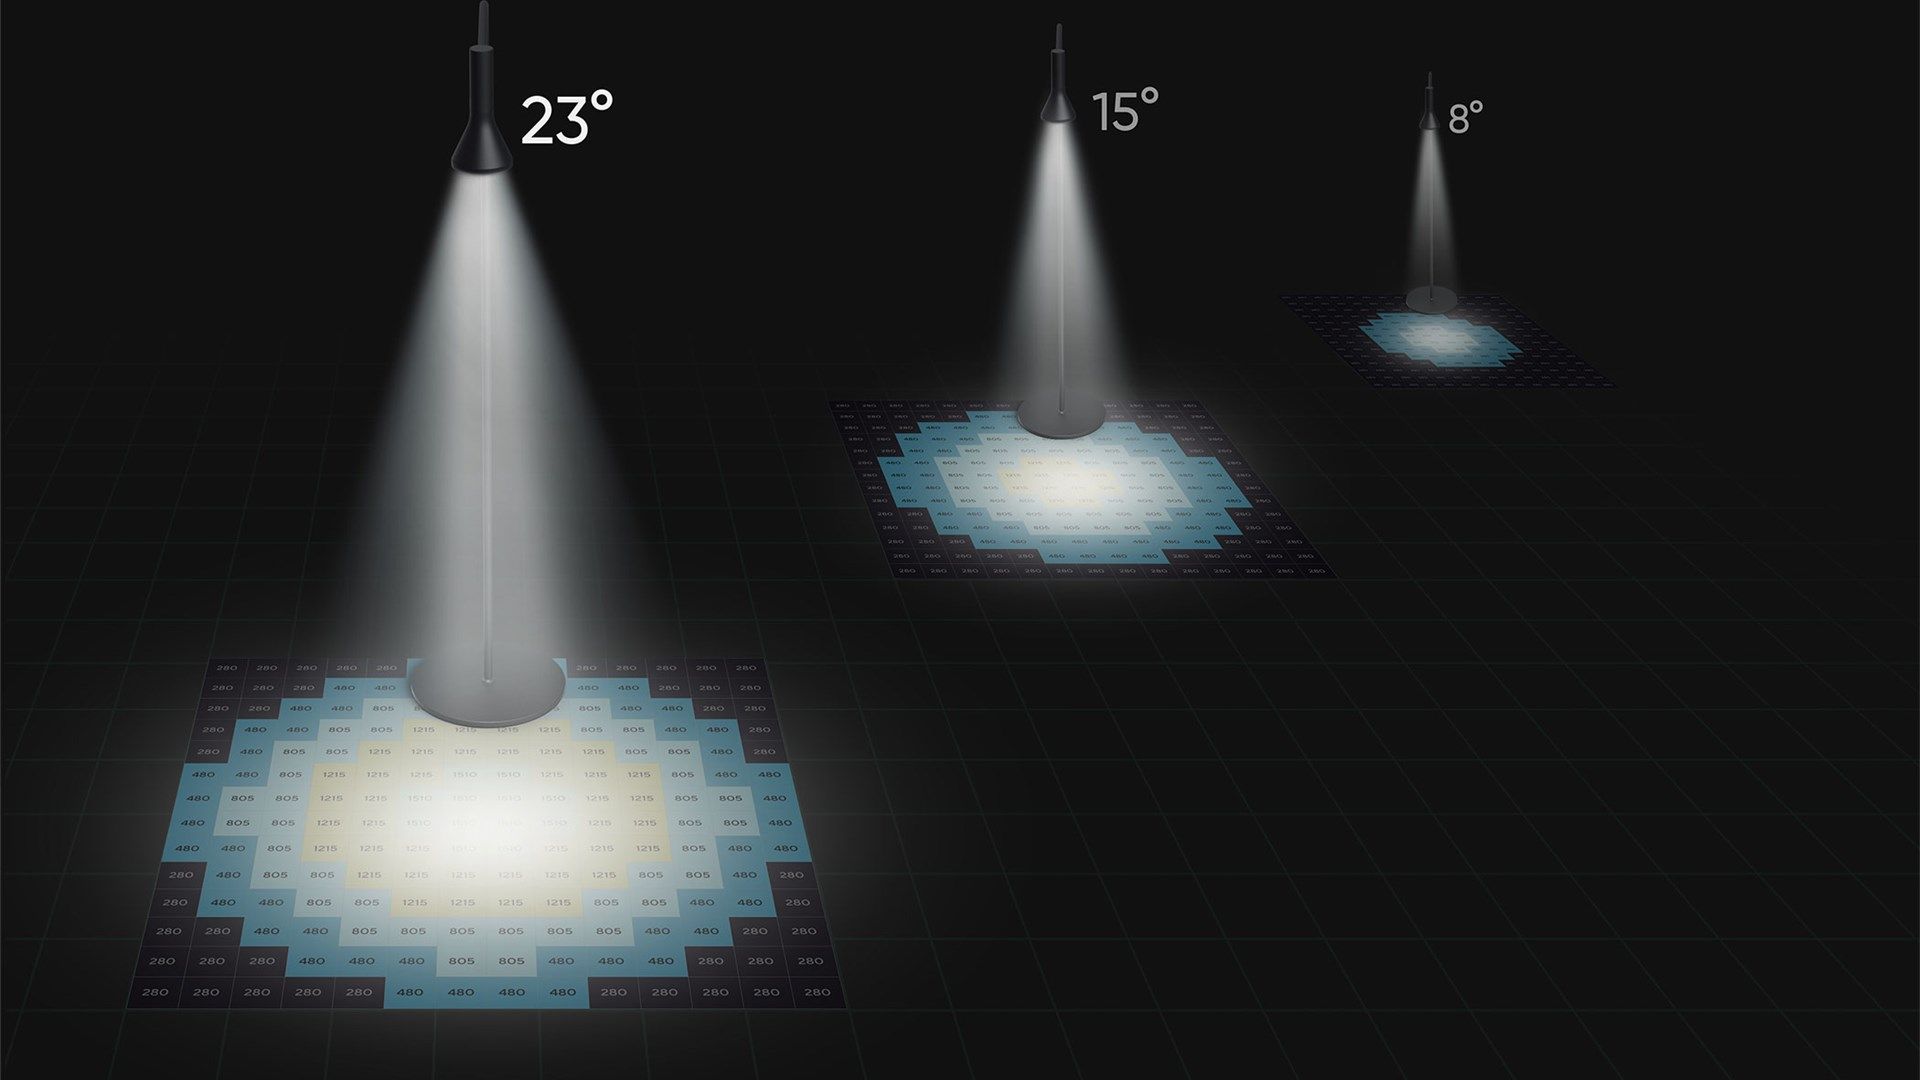 An image highlighting the spread of light at various brightness levels